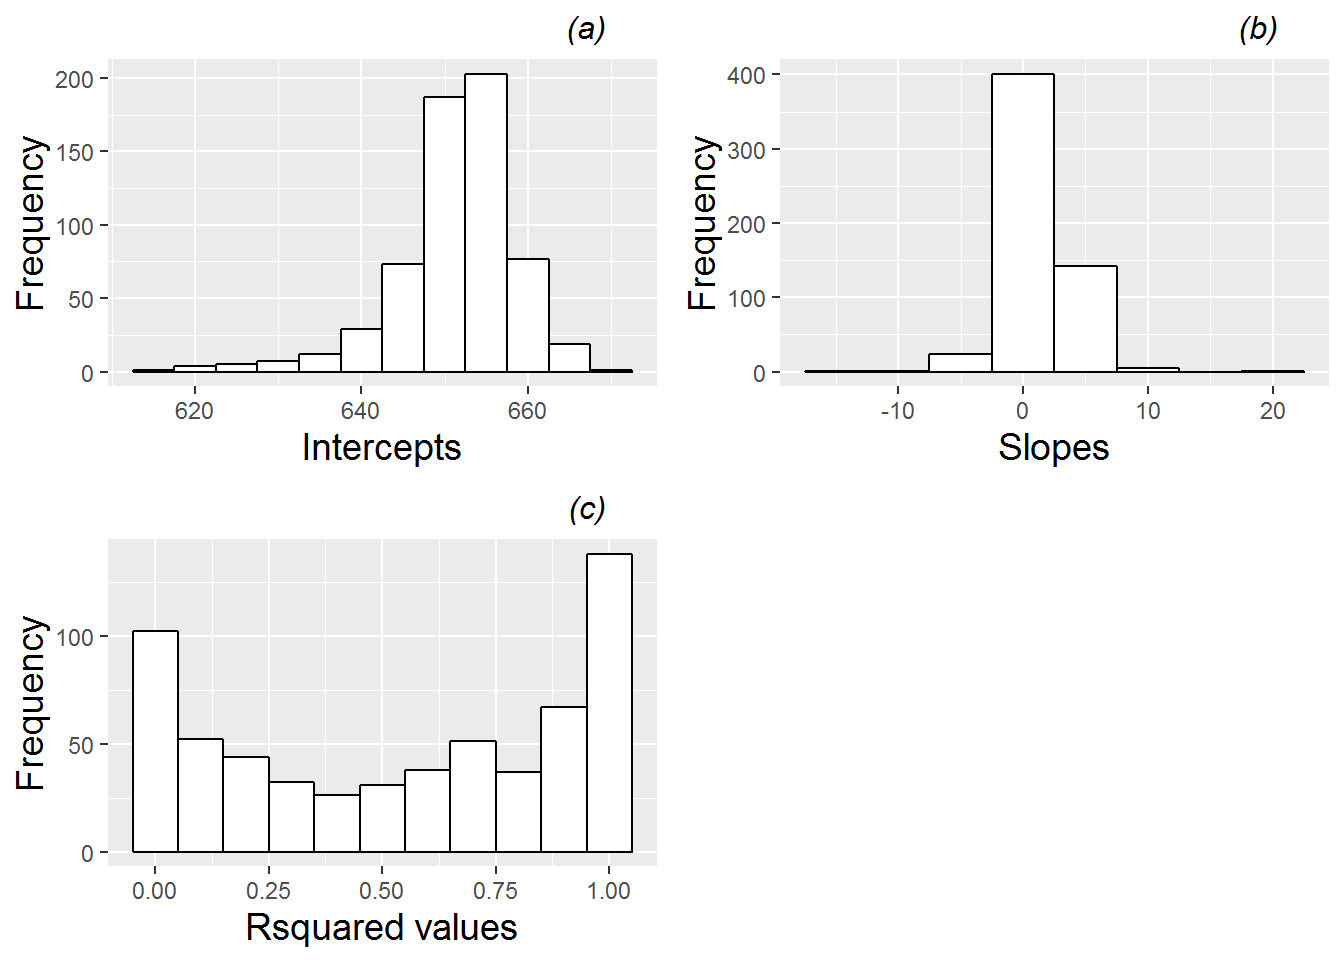  Histograms for (a) intercepts, (b) slopes, and (c) R-square values from fitted regression lines by school.